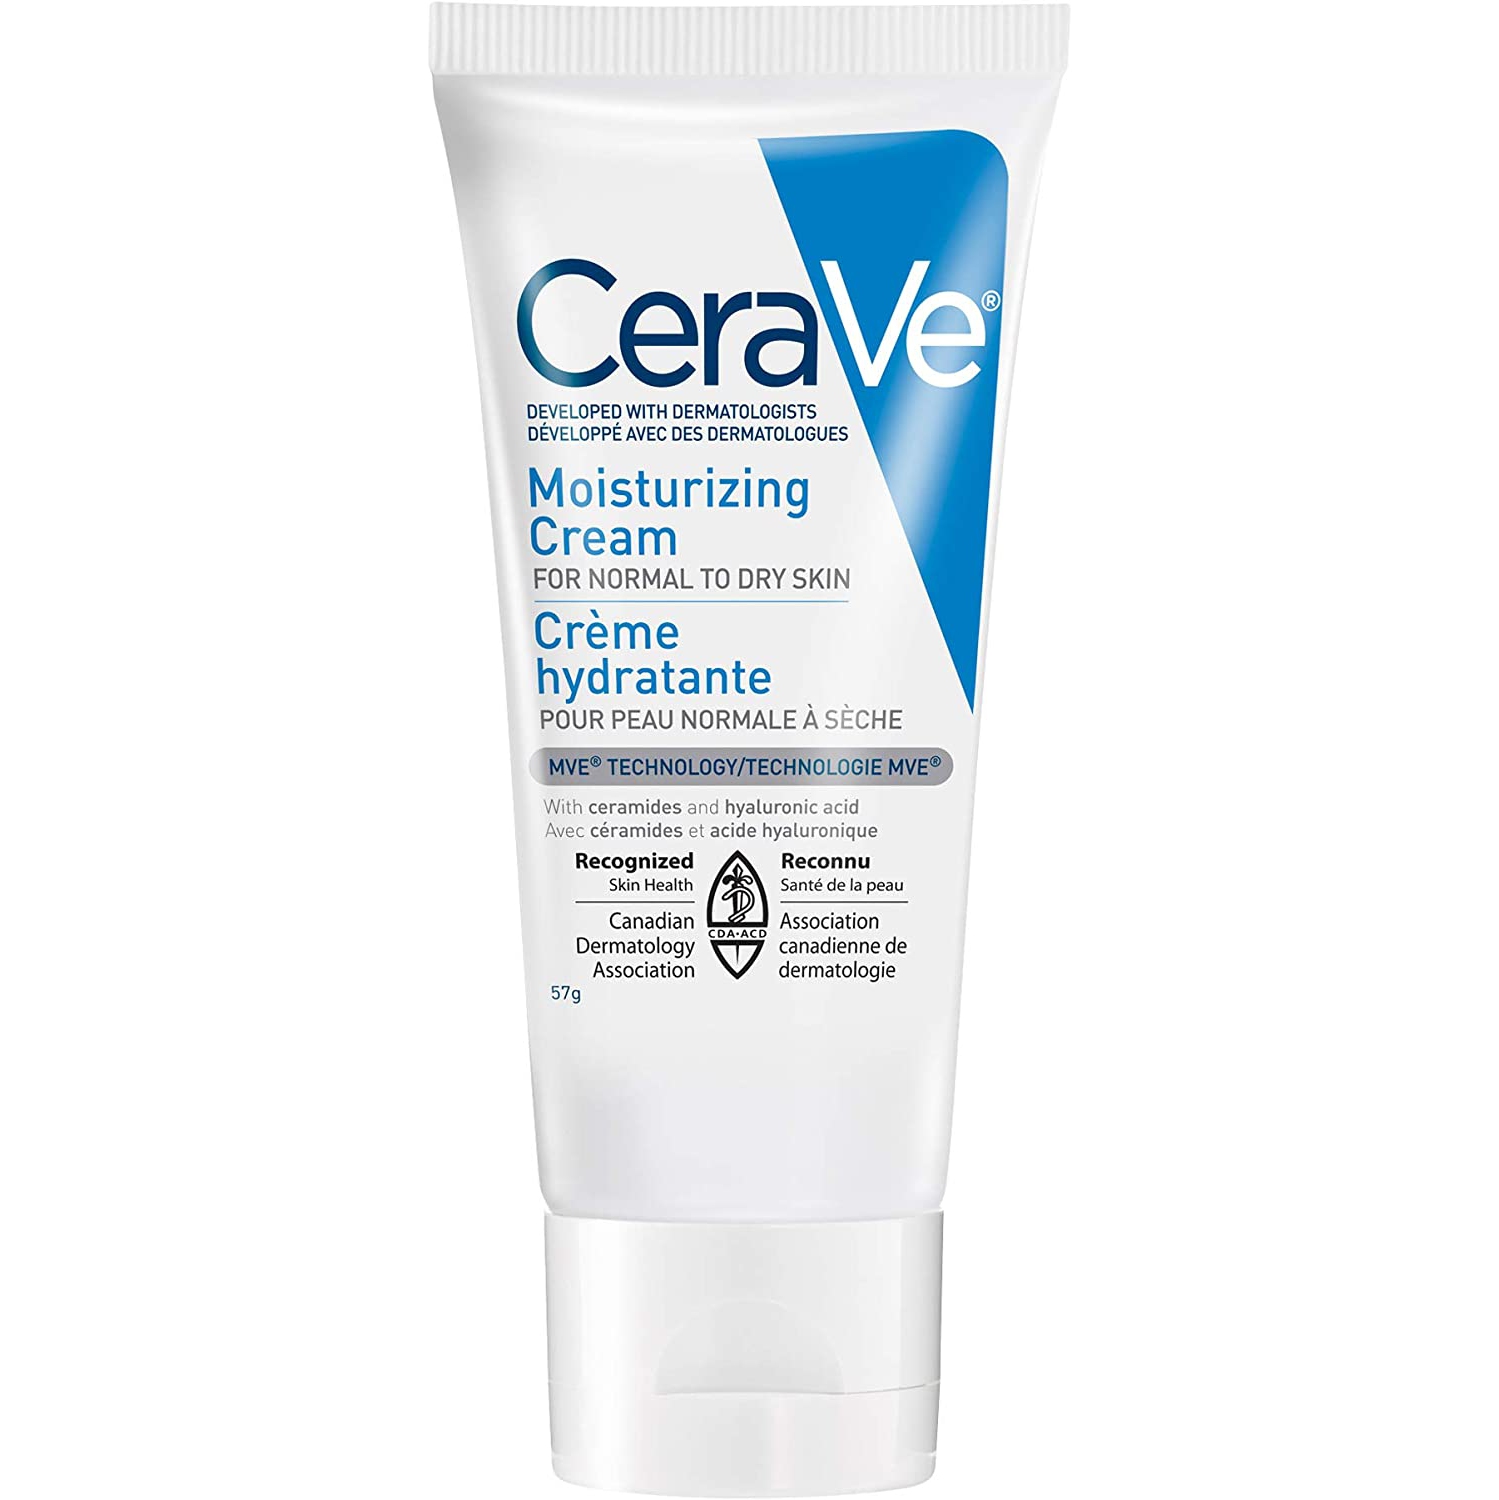 CeraVe Moisturizing Cream Travel Size Daily Face and Body Moisturizer for Normal to Dry Skin with Hyaluronic Acid Fragrance Free, 57 Grams